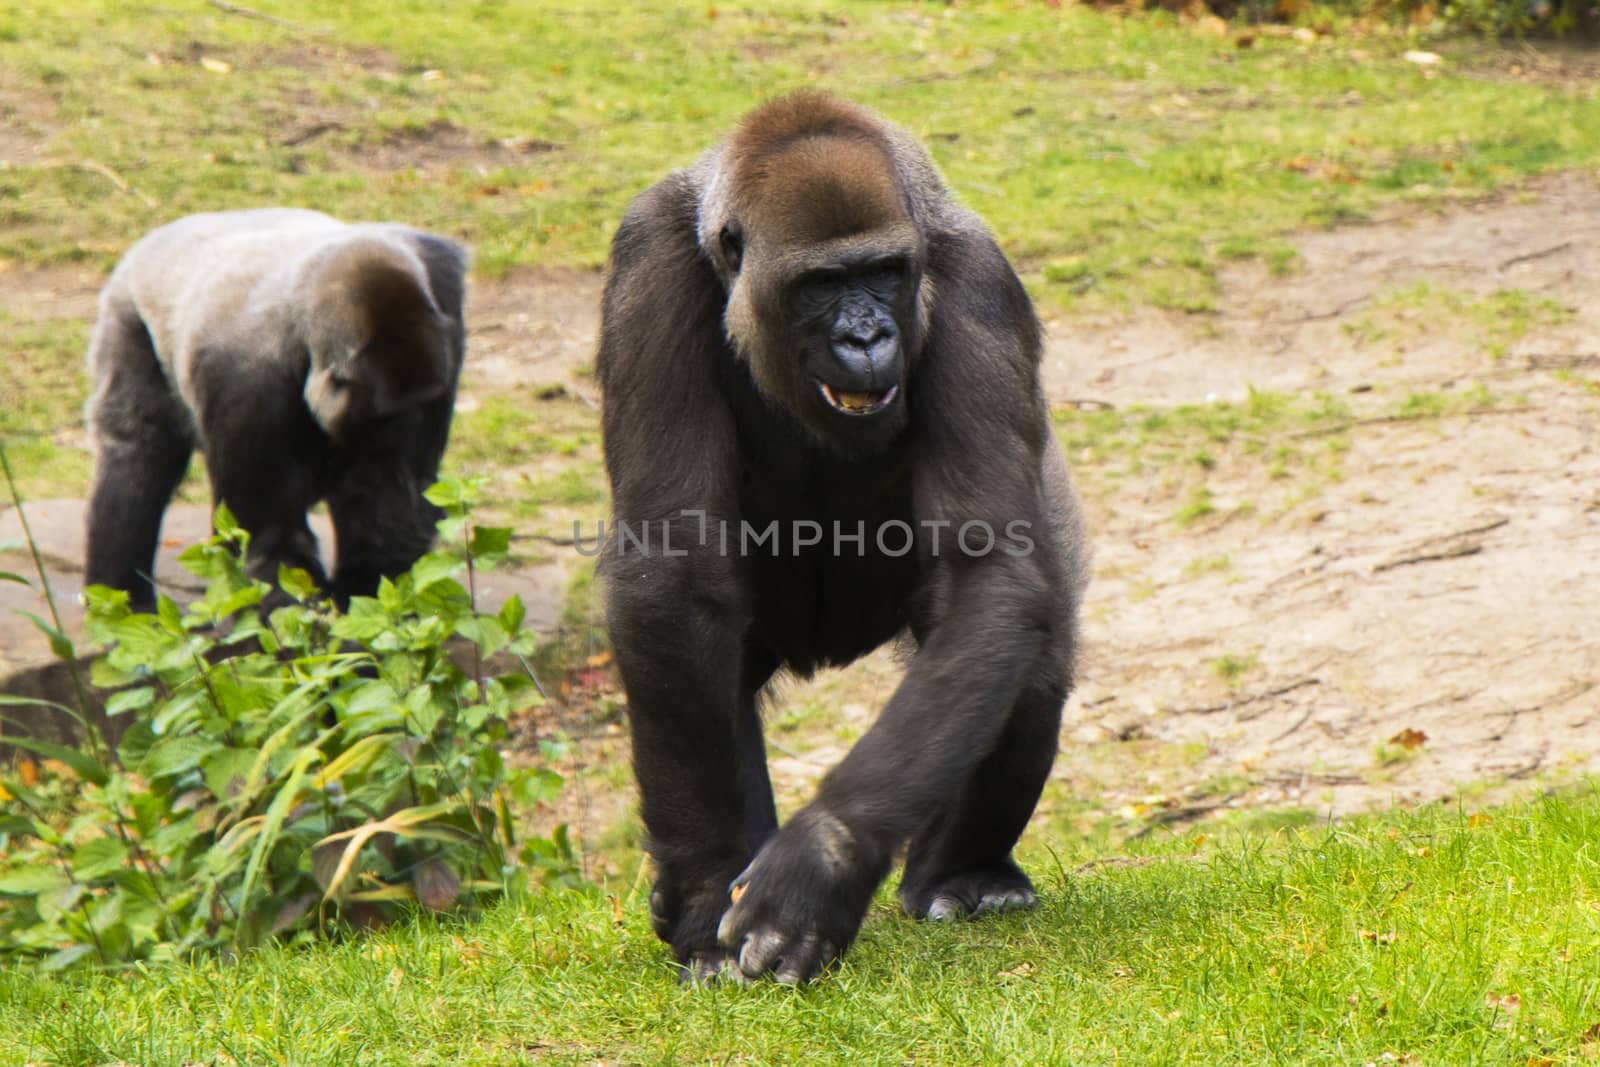 Gorilla in the Zoo by Taidundua